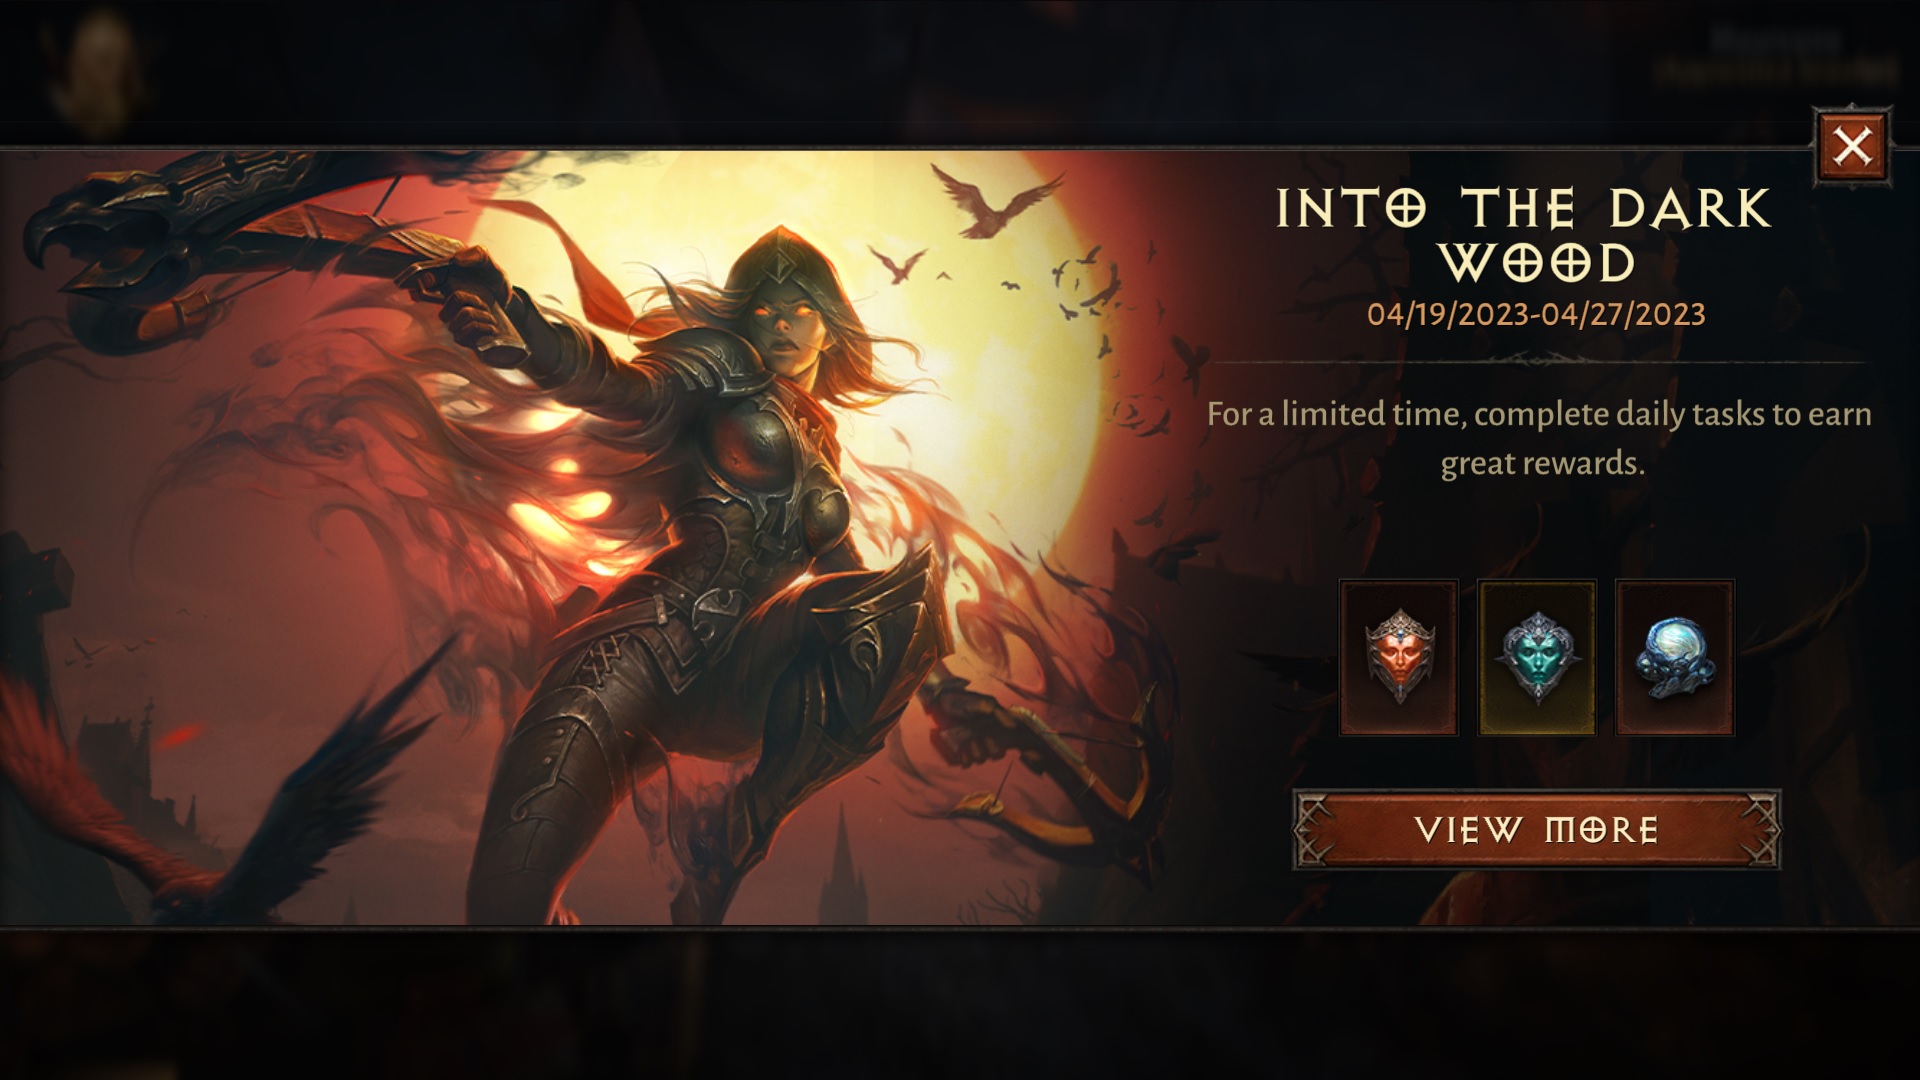 Diablo Immortal: Into the Dark Wood Limited Time Event Guide (April 2023)